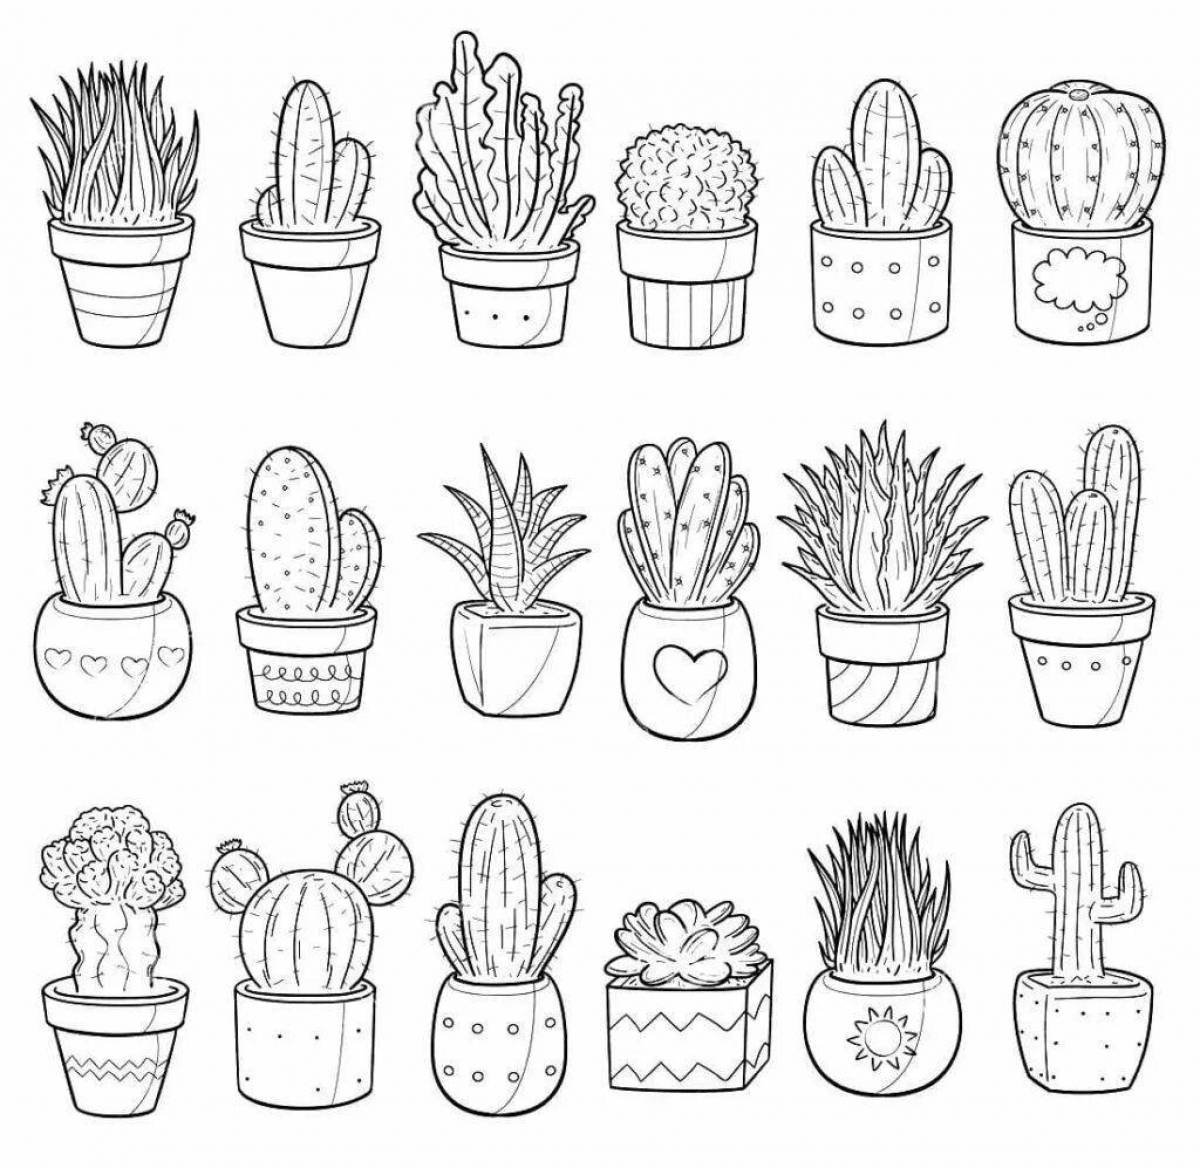 Charming cactus coloring book